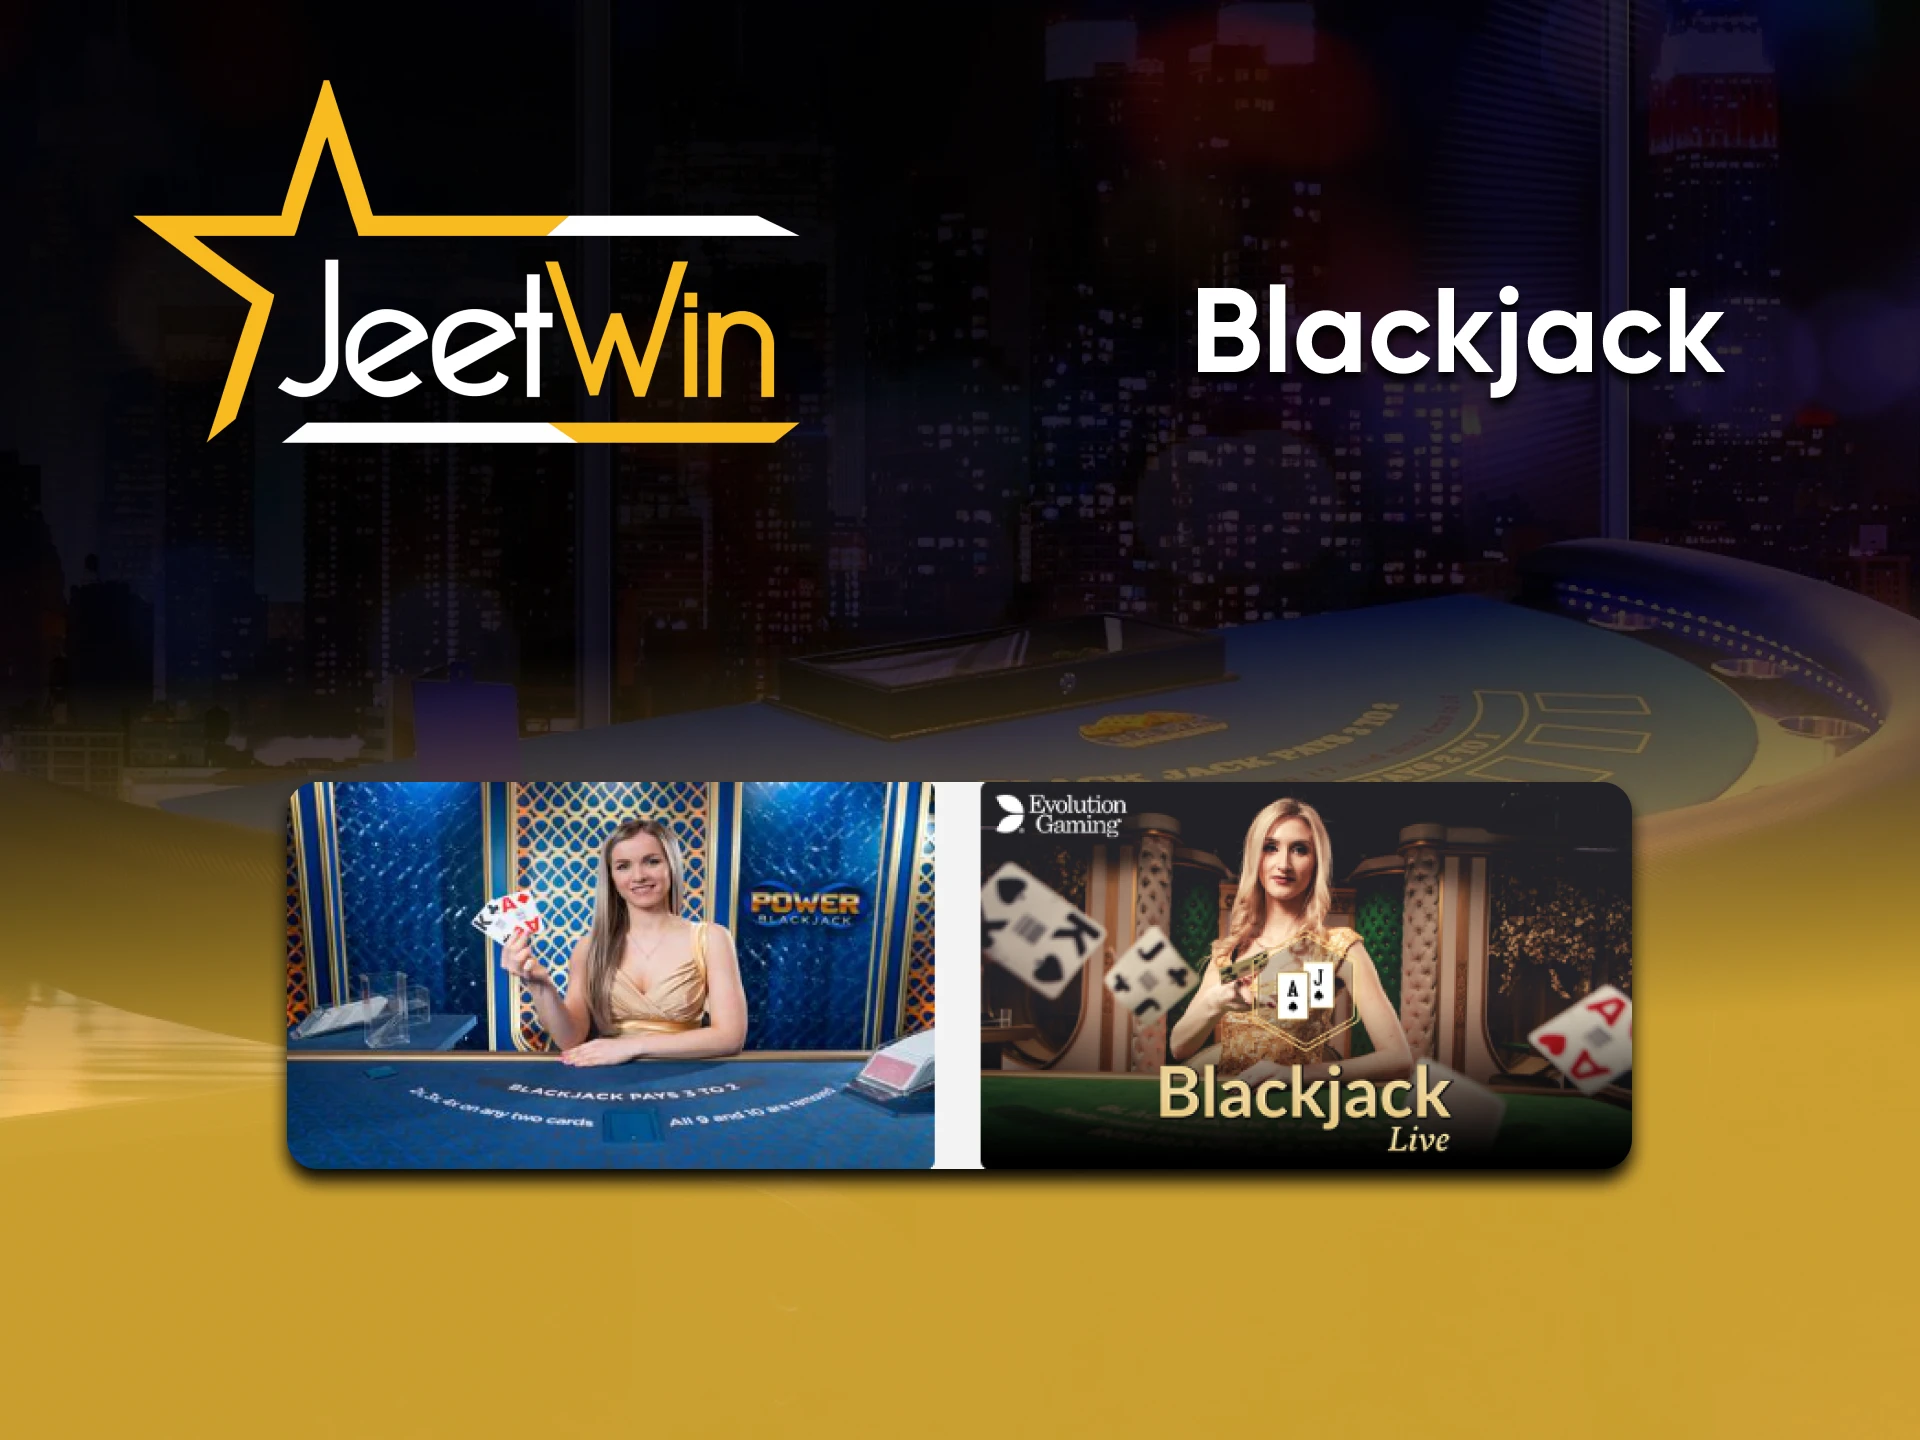 To play Blackjack, you need to go to the desired section of the Jeetwin website.